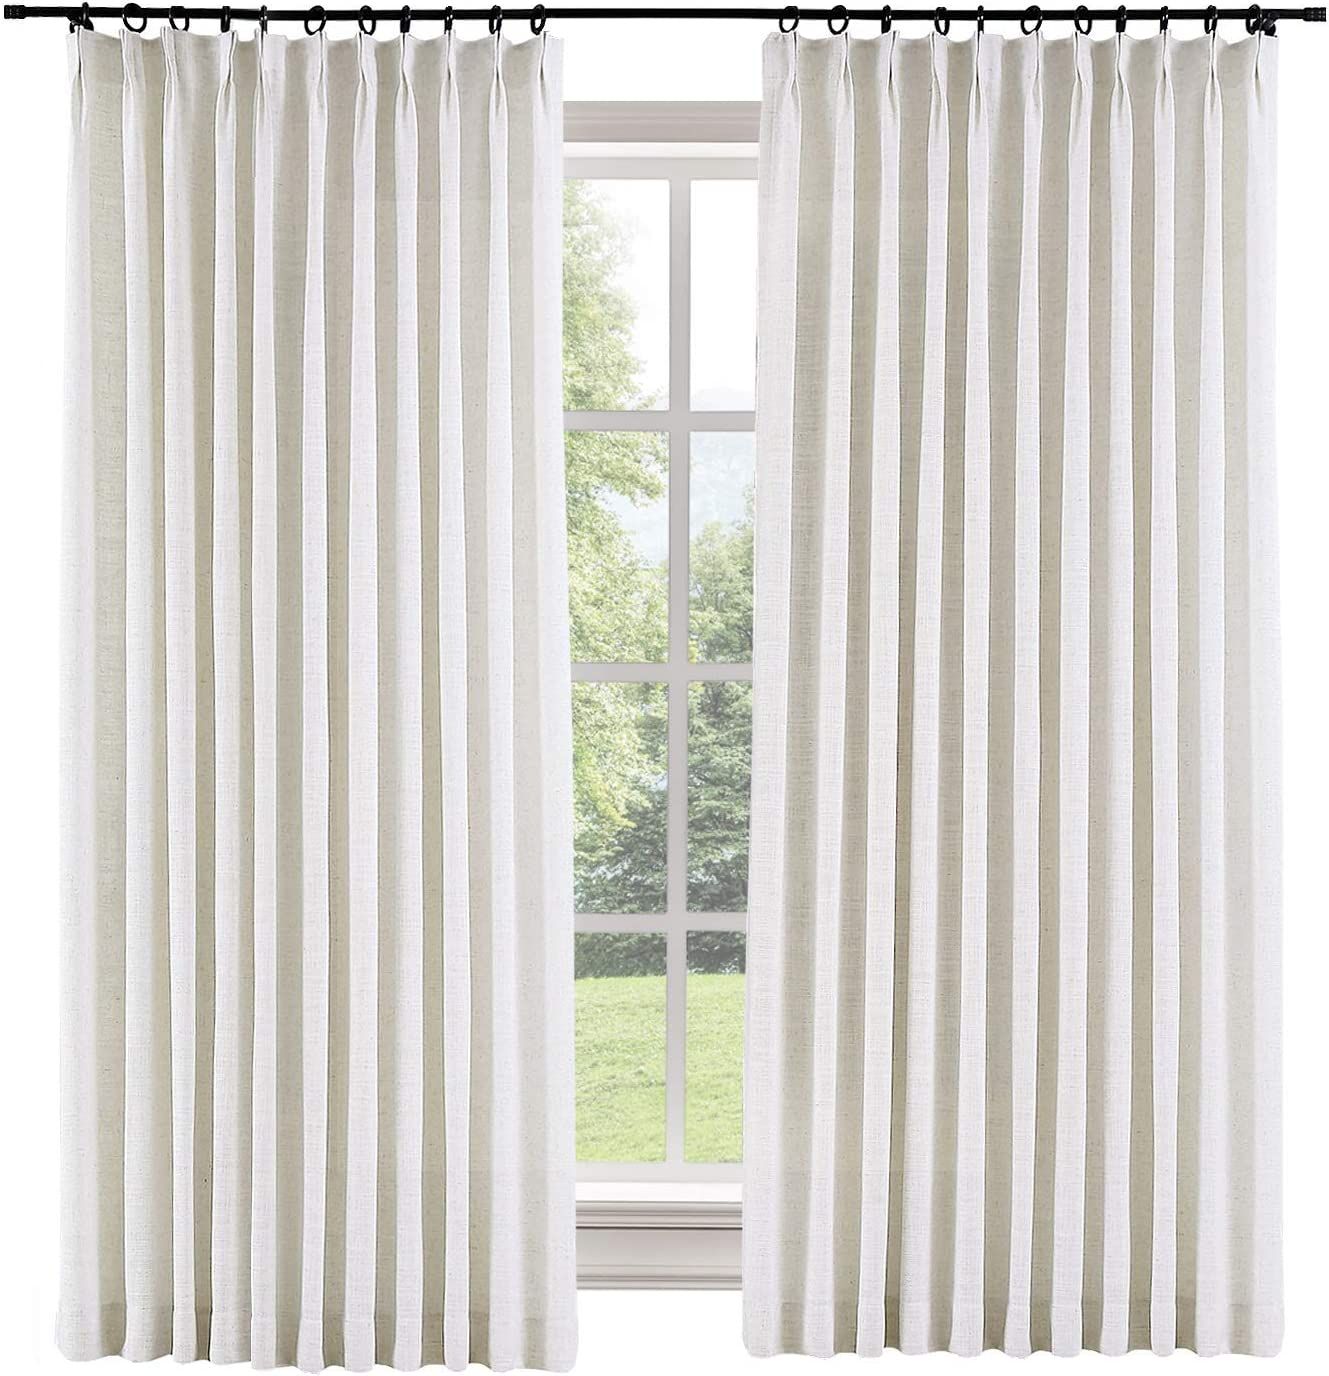 TWOPAGES 52 W x 96 L inch Pinch Pleat Darkening Drapes Faux Linen Curtains Drapery Panel for Livi... | Amazon (US)